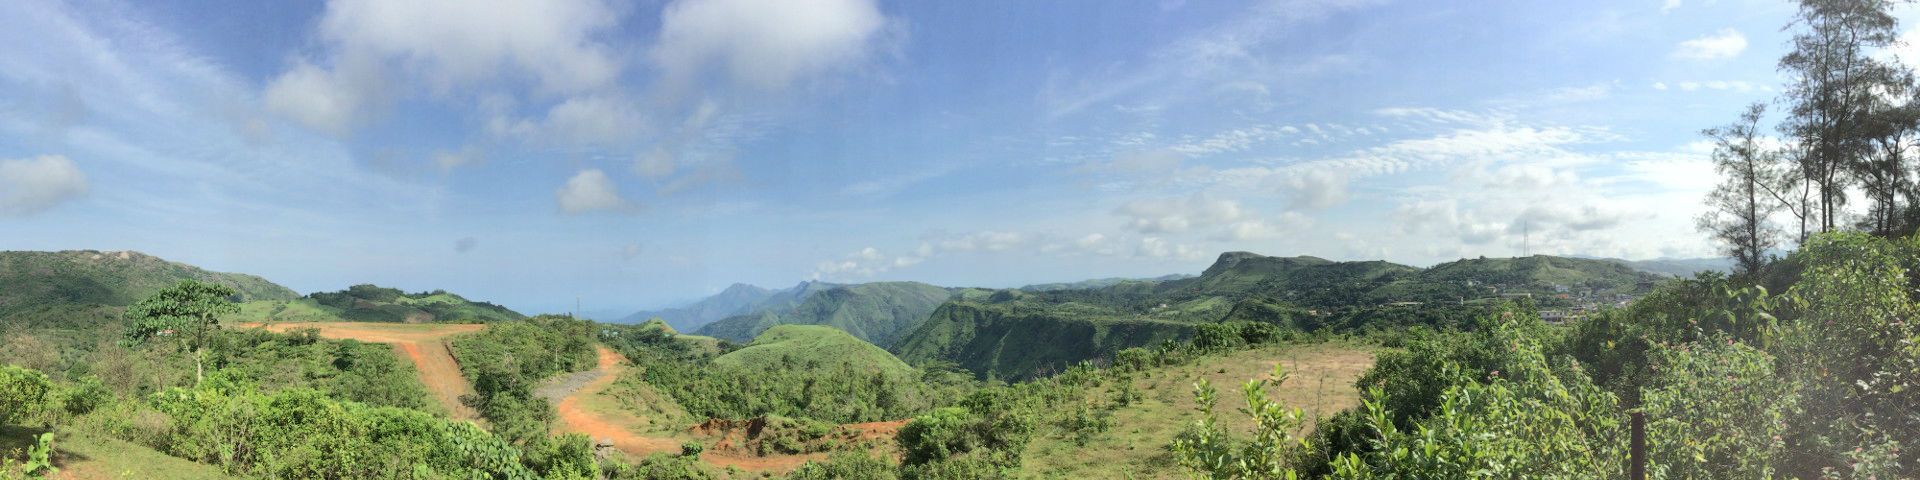 proposed site on the left, Vagamon town on the right